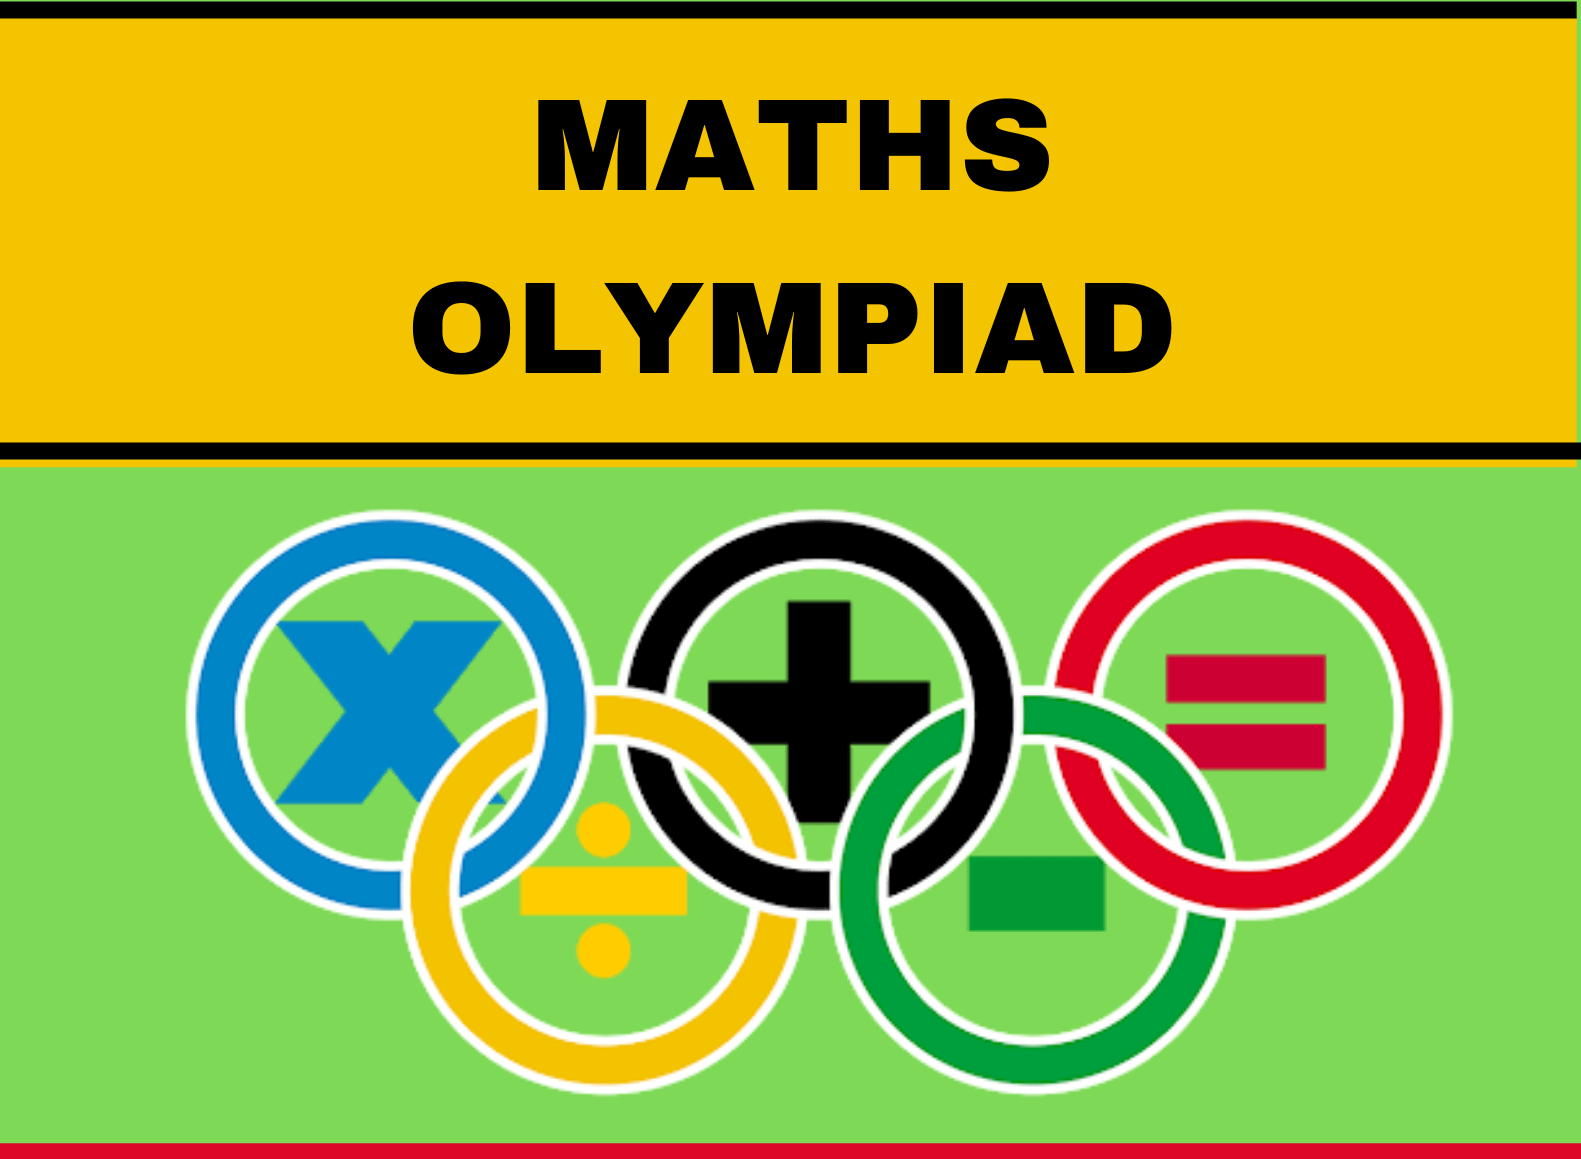 How can class 10 students successfully prepare for the Math Olympiad